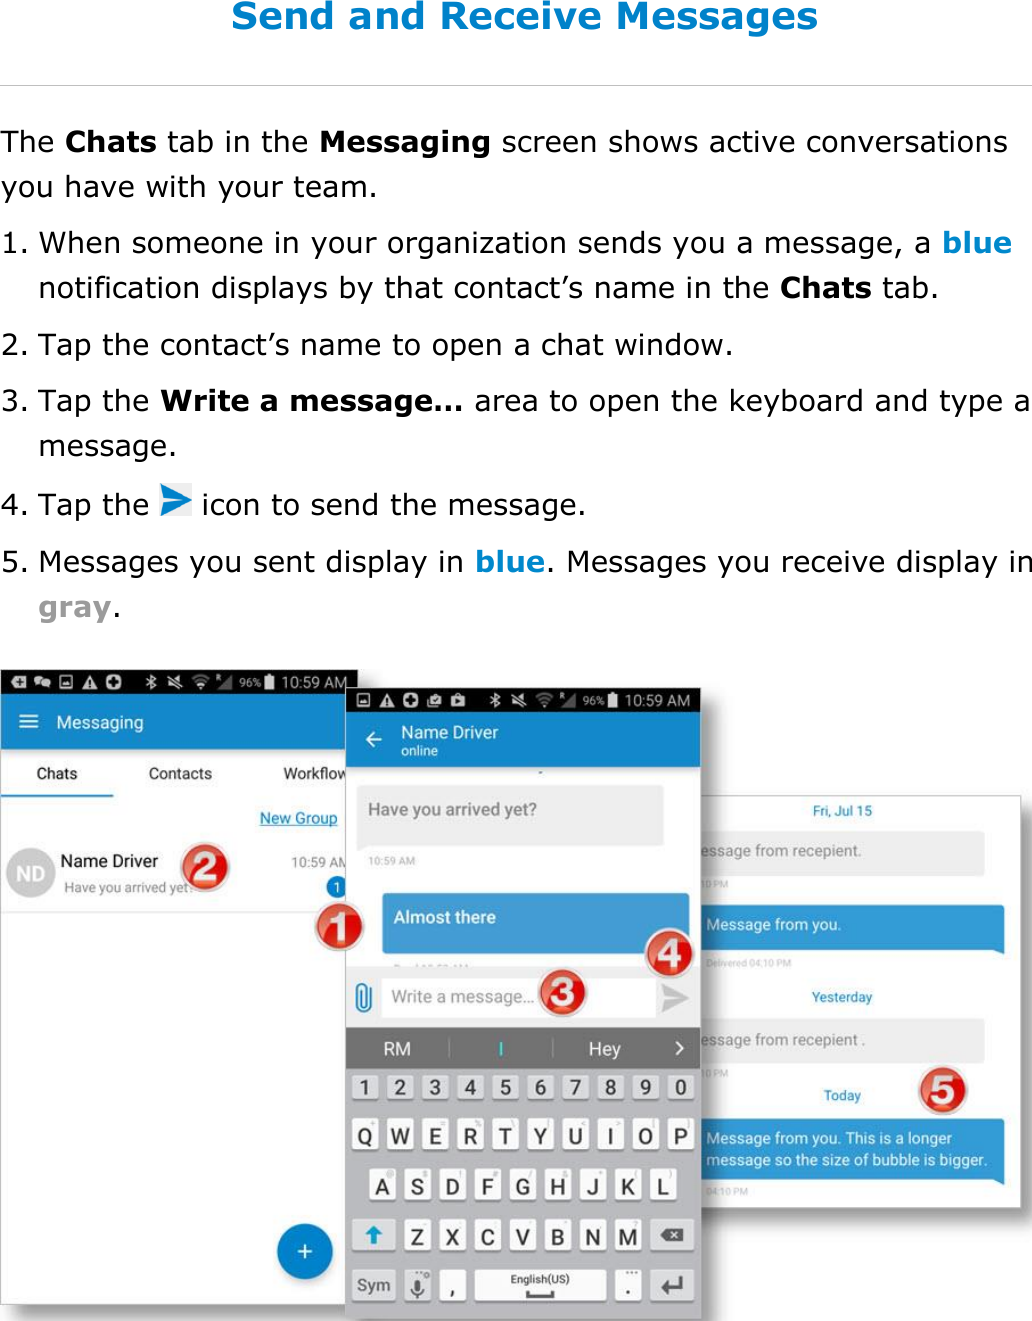 Send Messages, Forms, and Workflows DriverConnect User Guide  70 © 2017, Rand McNally, Inc. Send and Receive Messages The Chats tab in the Messaging screen shows active conversations you have with your team. 1. When someone in your organization sends you a message, a blue notification displays by that contact’s name in the Chats tab. 2. Tap the contact’s name to open a chat window. 3. Tap the Write a message… area to open the keyboard and type a message. 4. Tap the   icon to send the message. 5. Messages you sent display in blue. Messages you receive display in gray.    